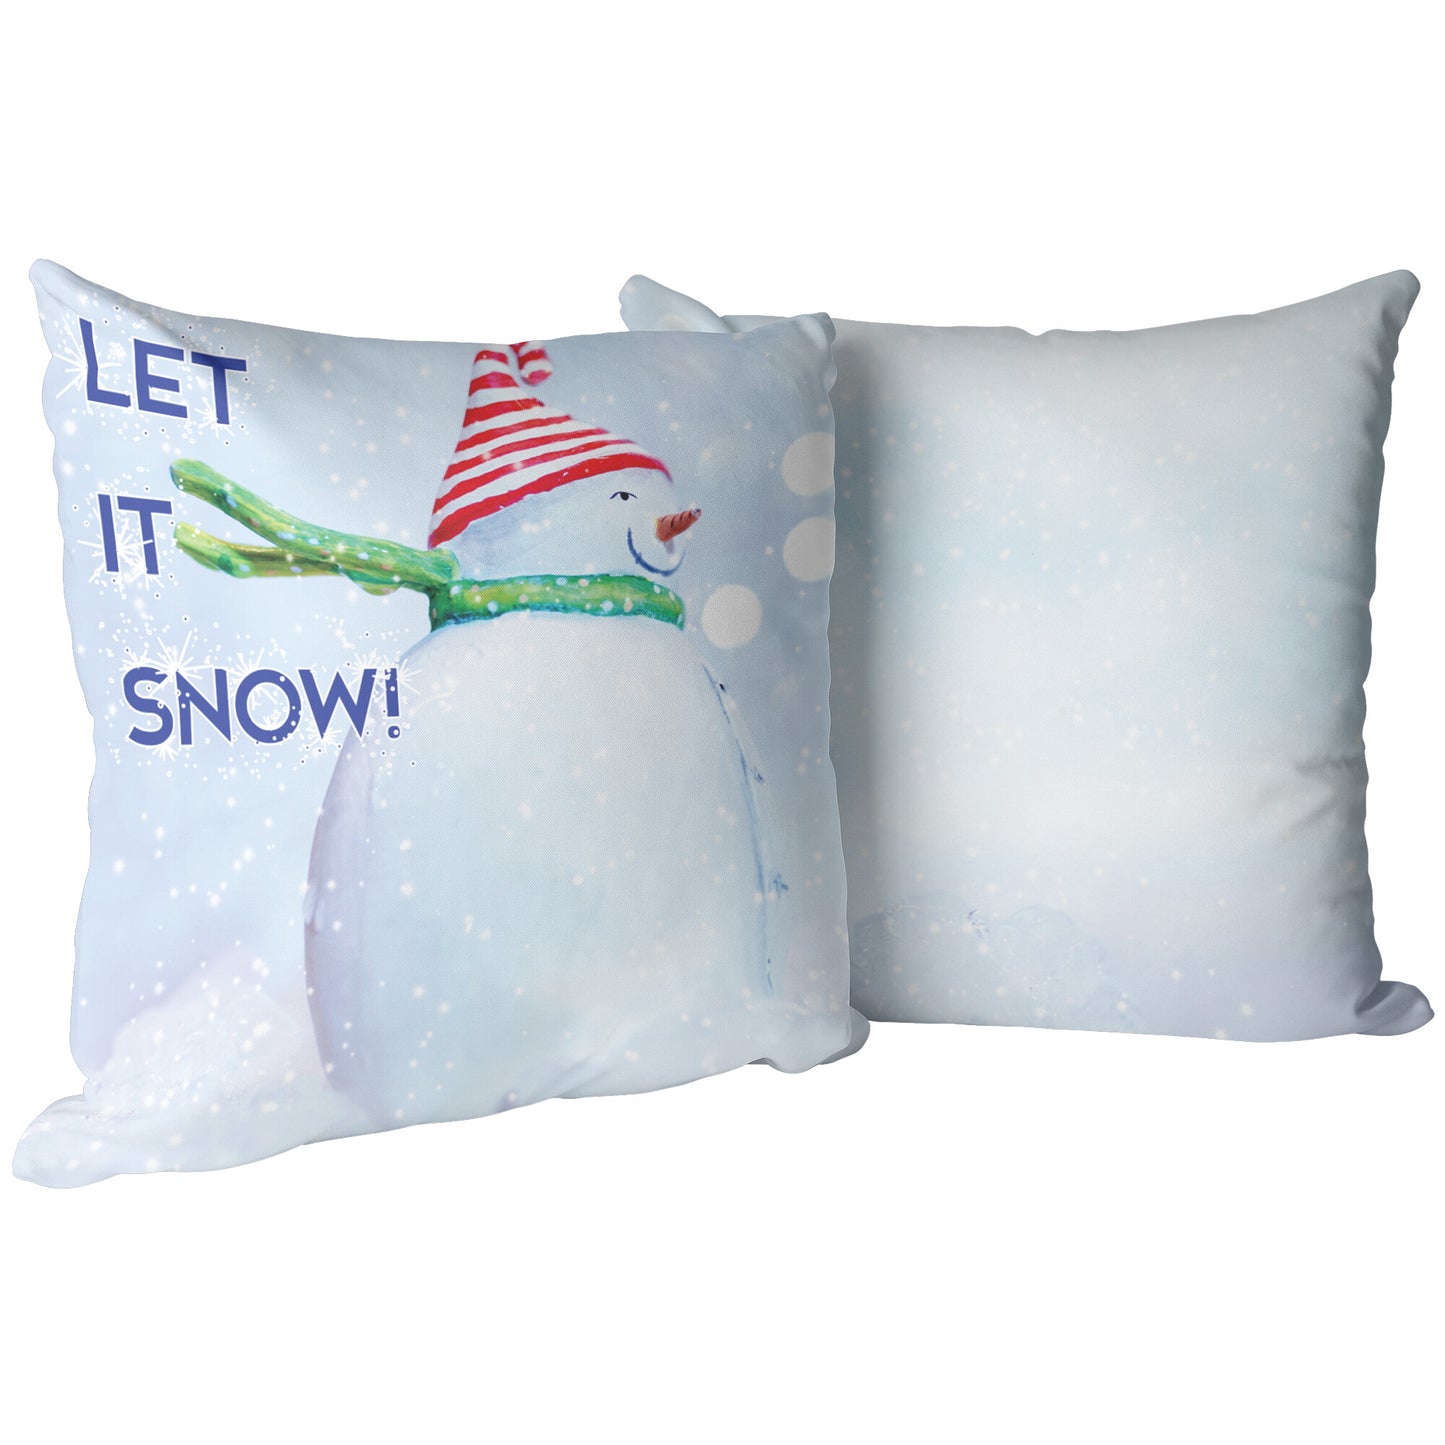 Let It Snow! Pillow - Signs and Seasons Gifts